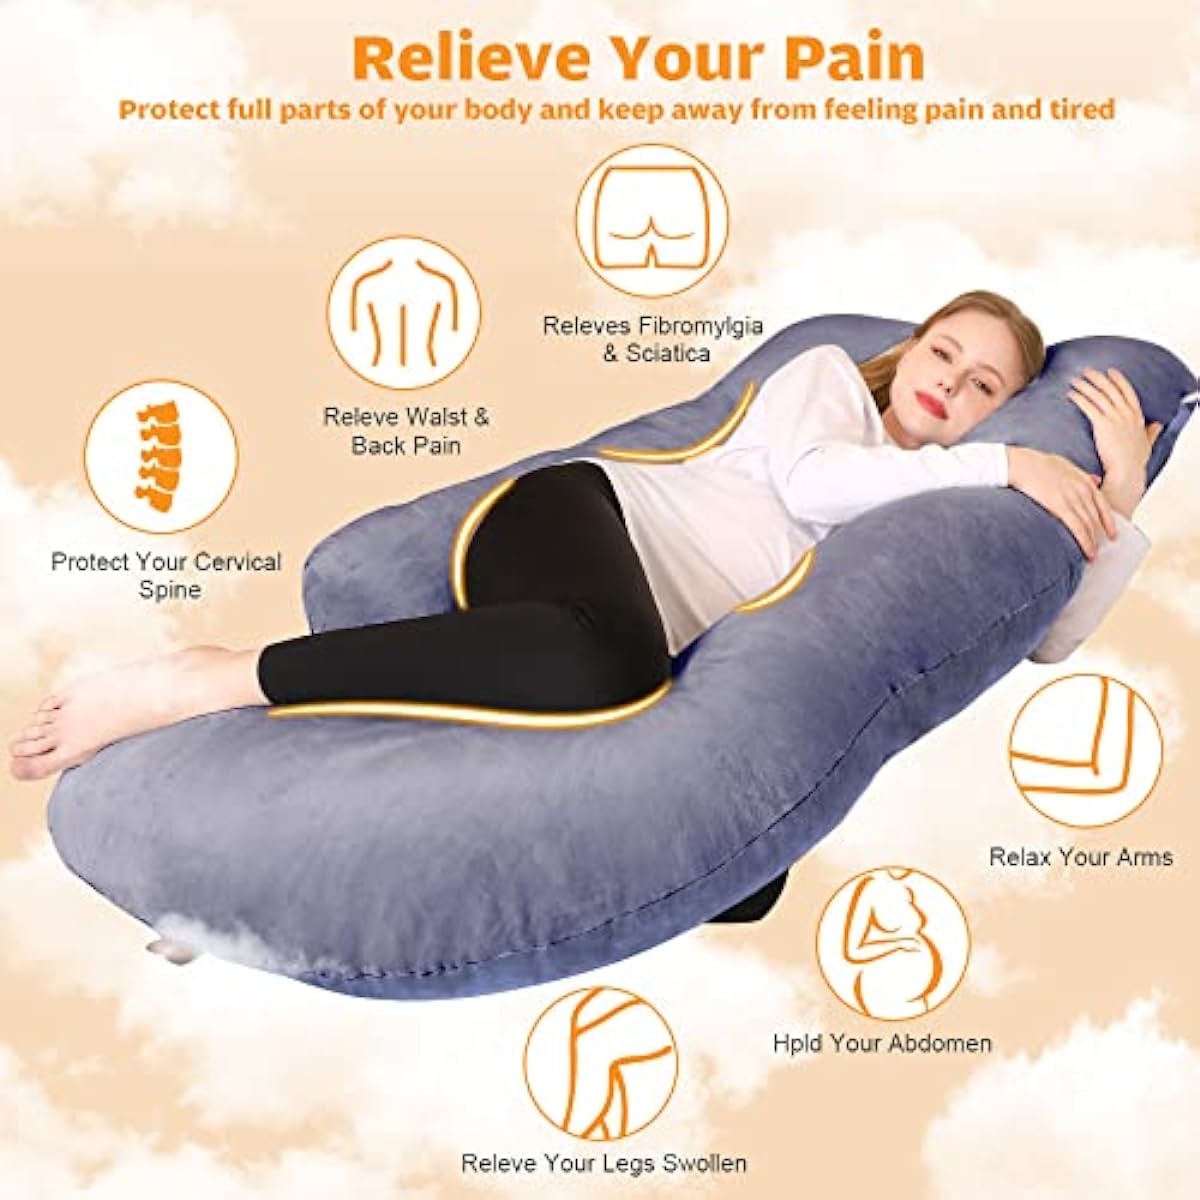 Chilling Home Pregnancy Pillows, U Shaped Full Body Pillow for Pregnancy 55 Inch Maternity Pillow for Pregnant Women, Pregnancy Must Haves Pregnancy Pillows for Sleeping with Removable Cover